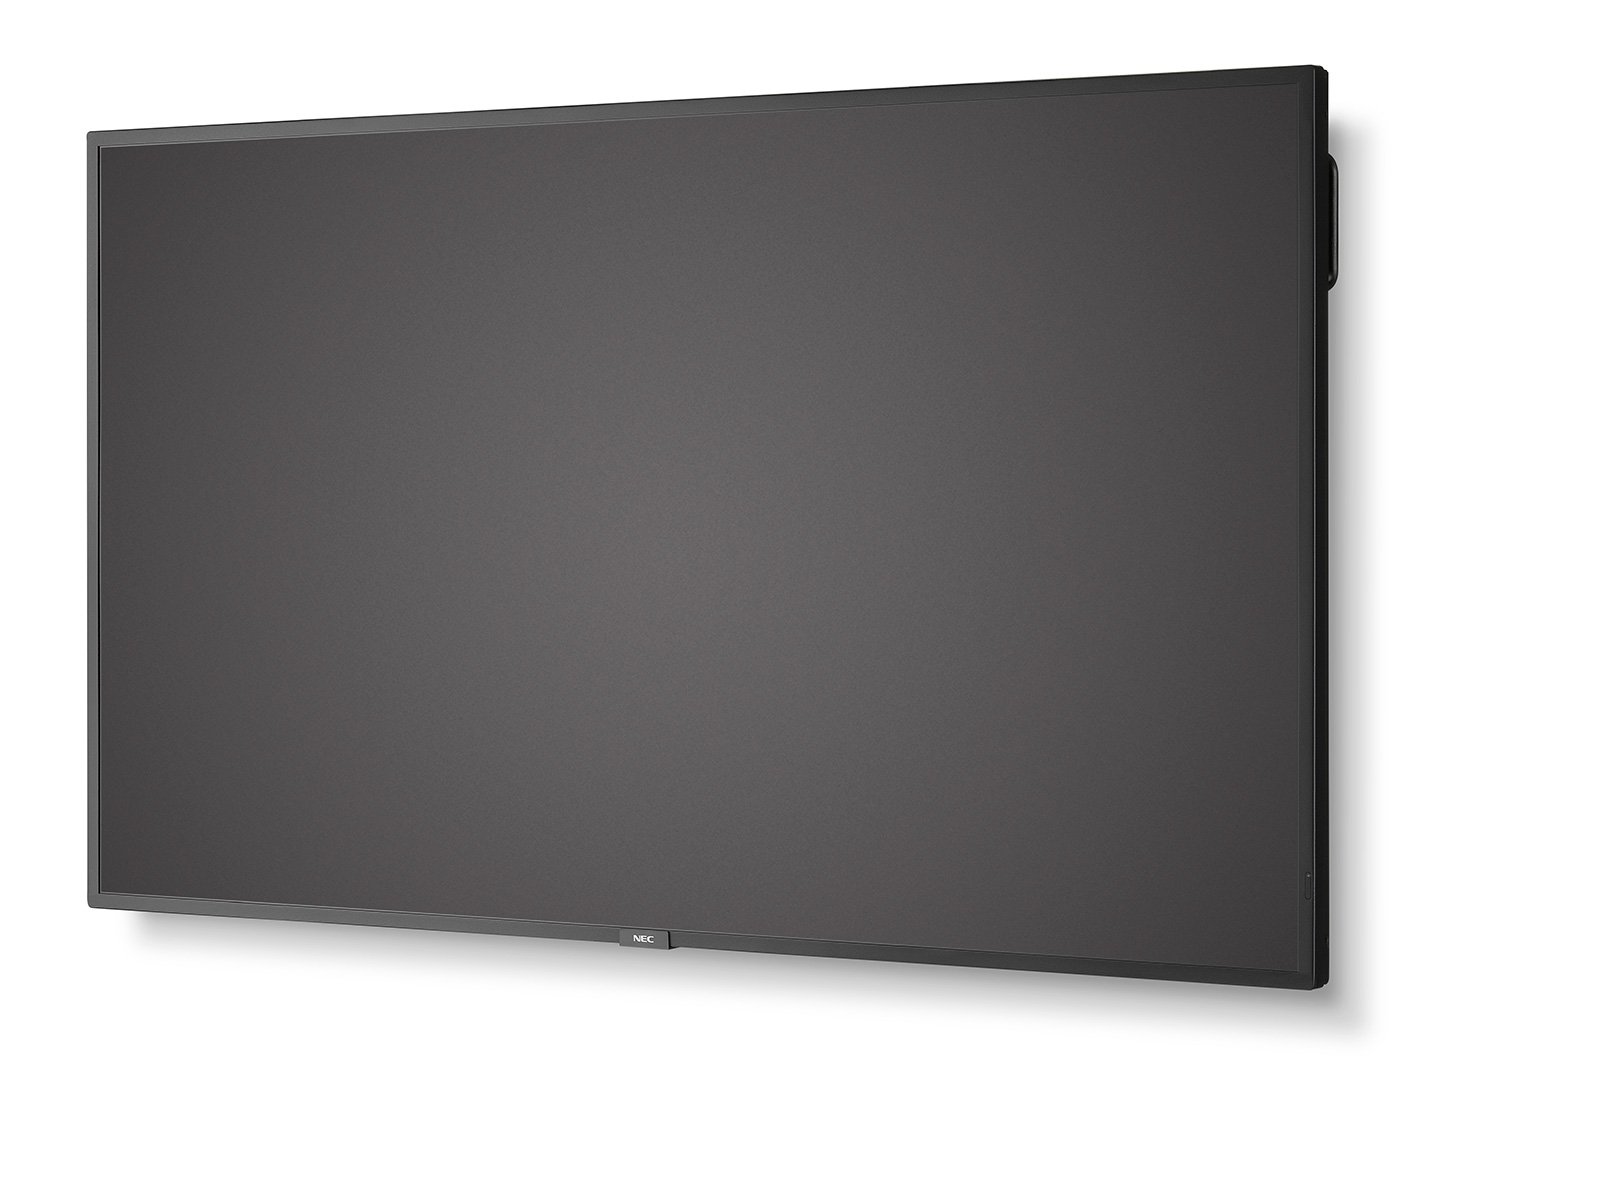 NEC MultiSync ME431 - 43 Inch - 400 cd/m² - Ultra-HD - 3840x2160 Pixel - 18/7 - Message Essential Large Format Display